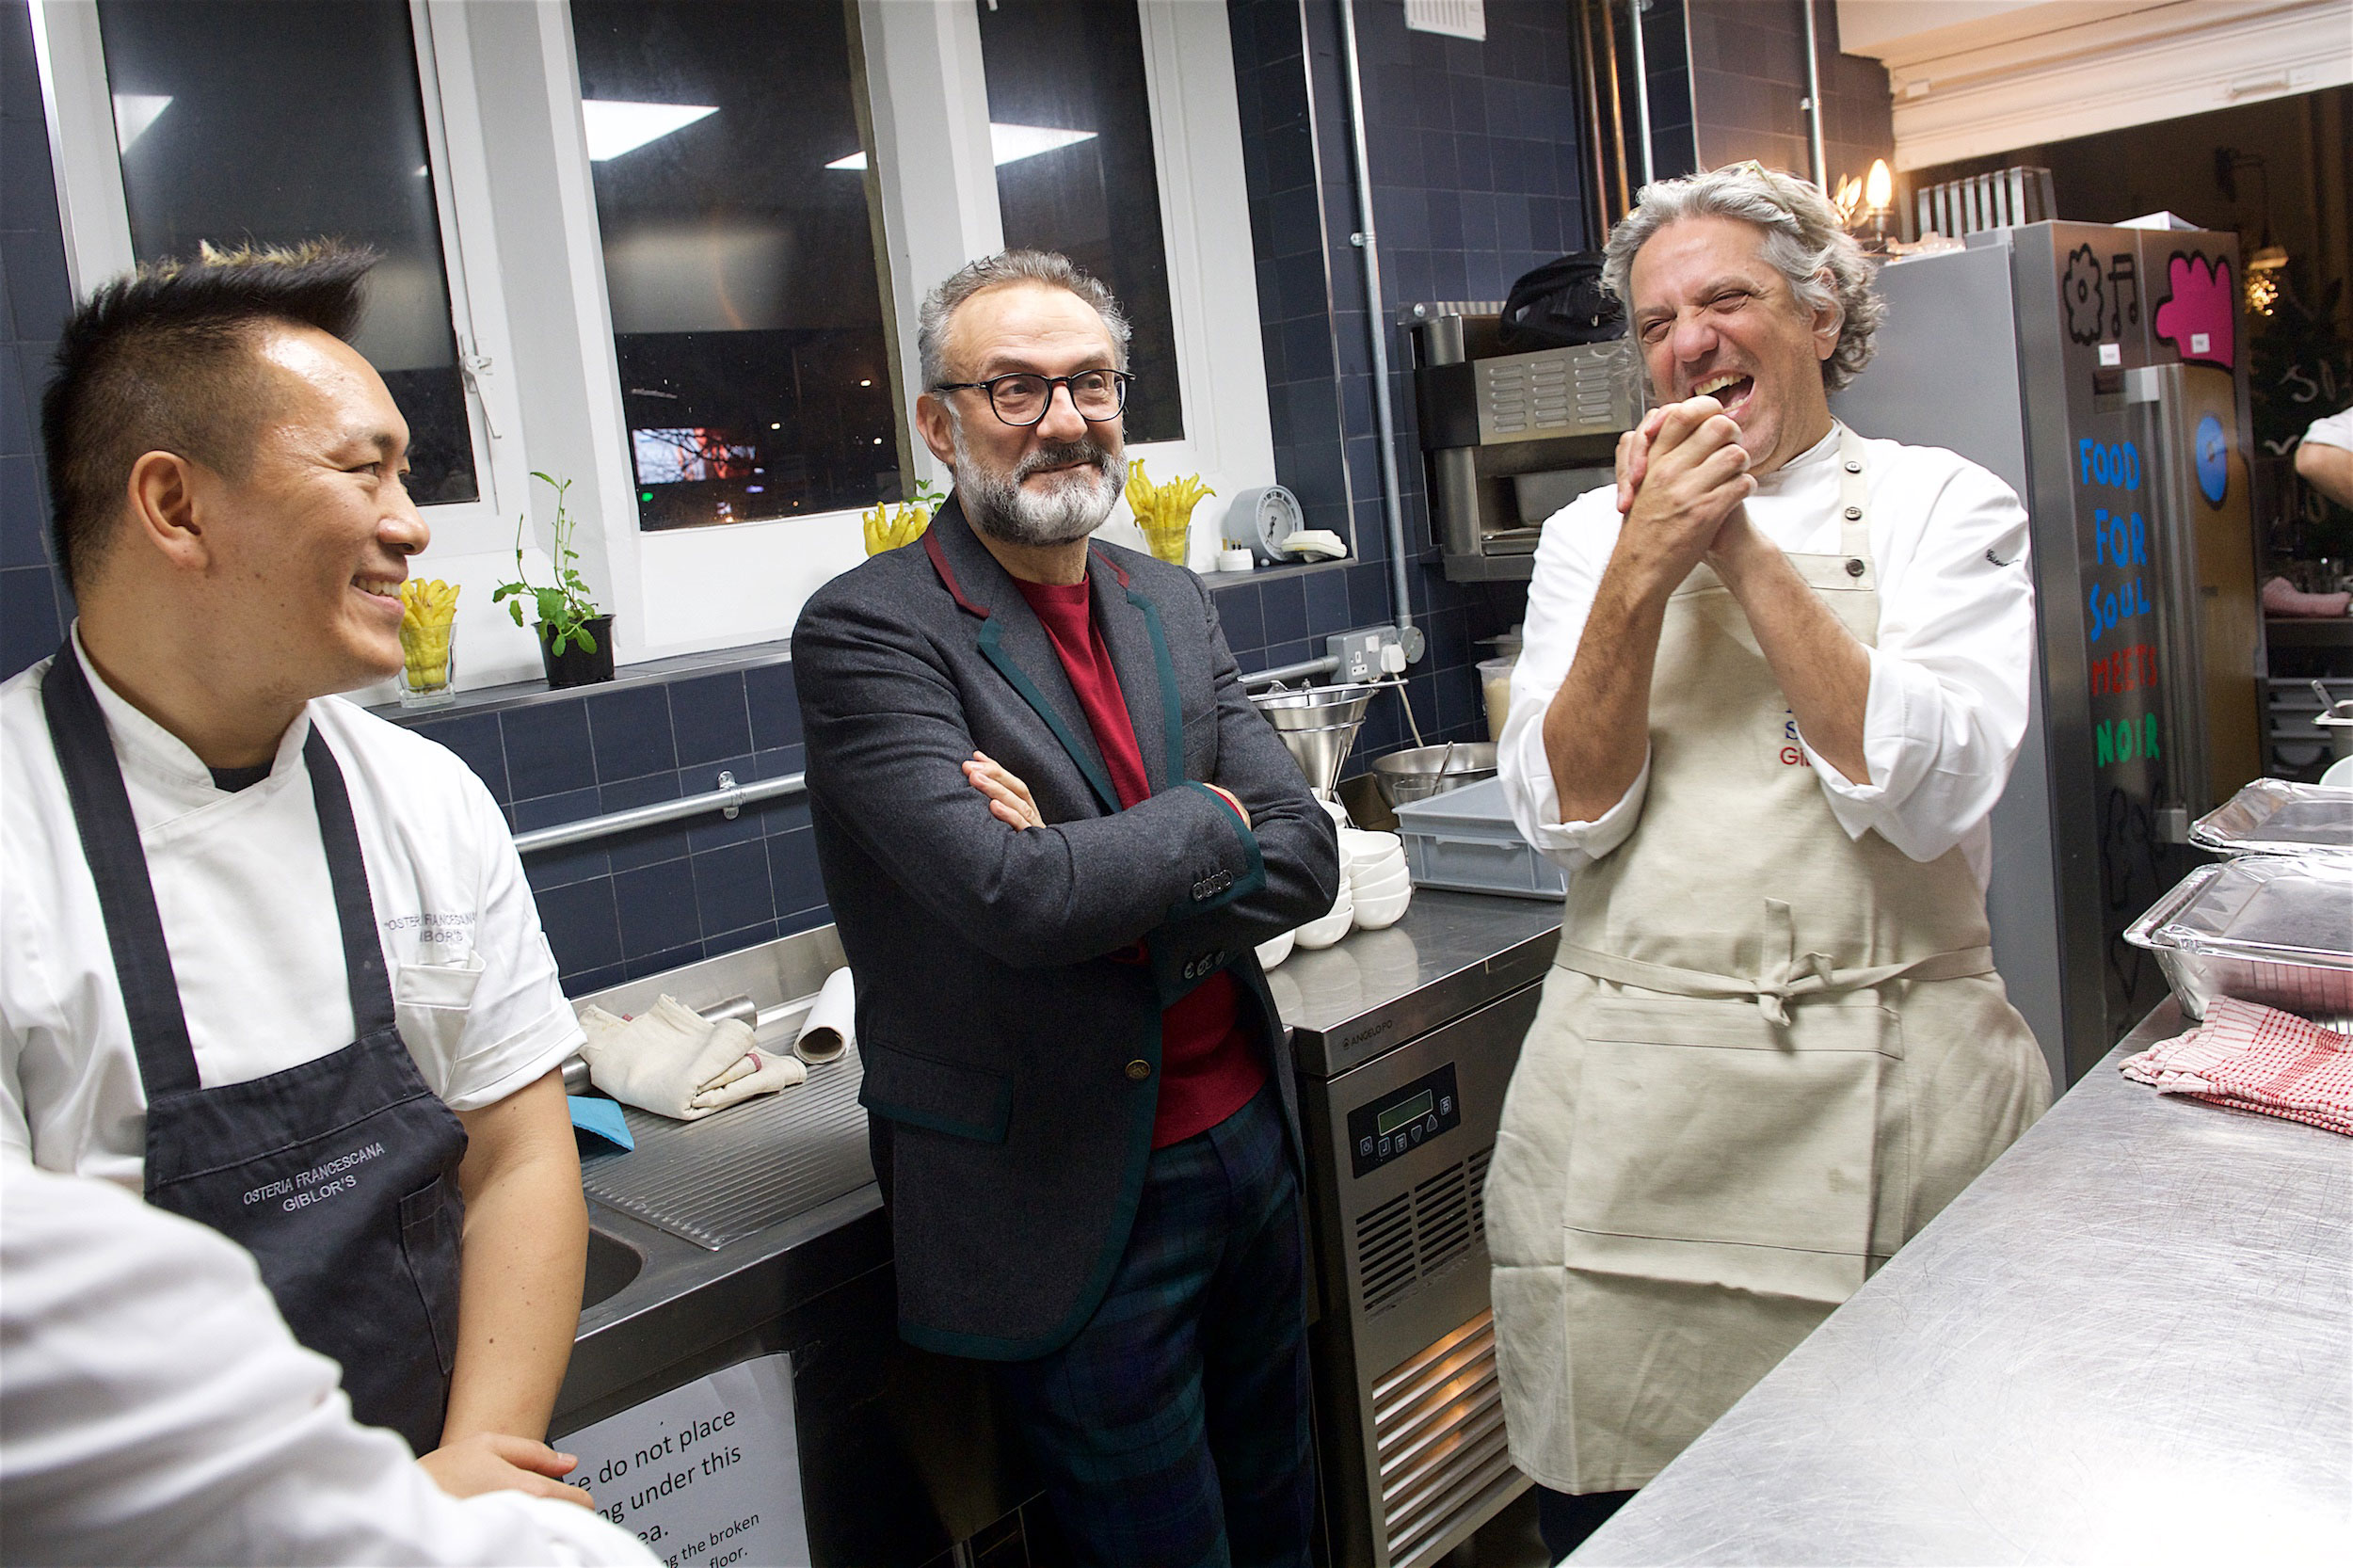 Taka, Massimo and Giorgio share a laugh in the kitchen before the event